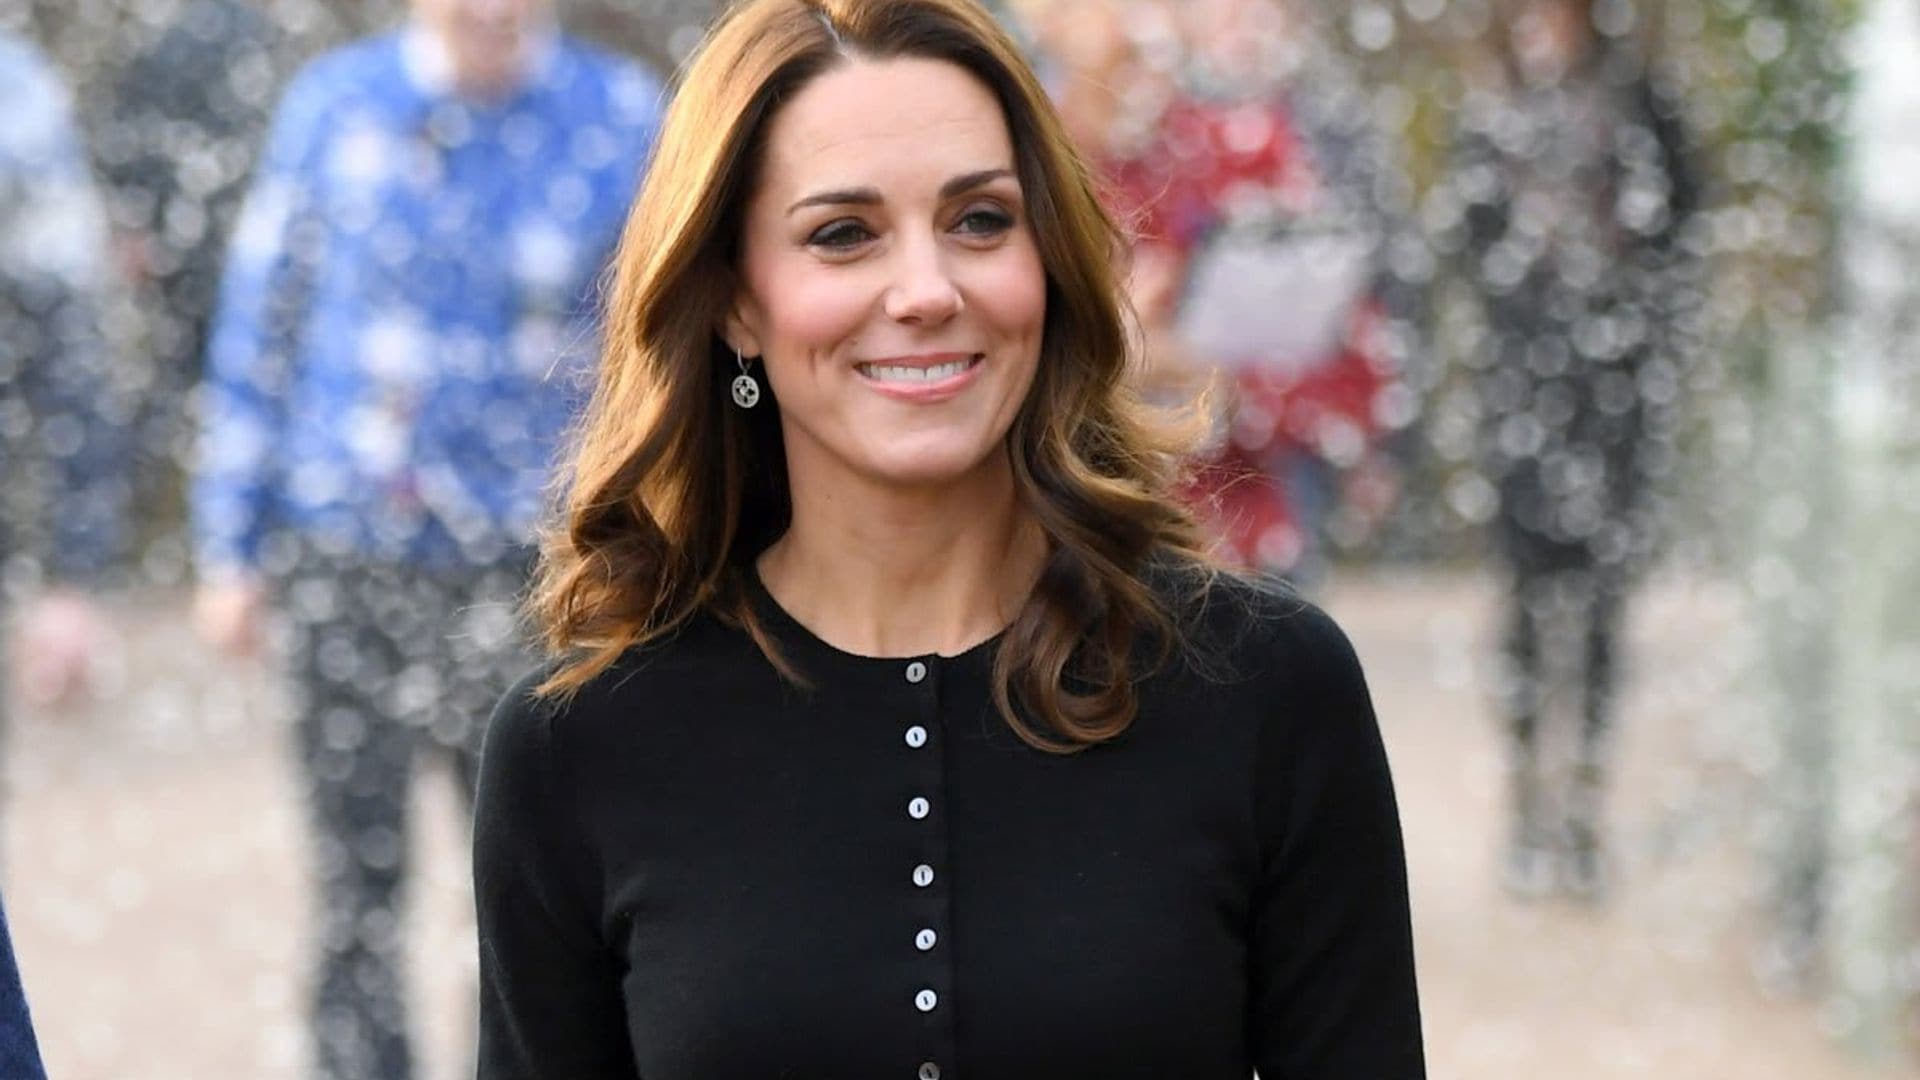 Kate Middleton to host Christmas concert: Report